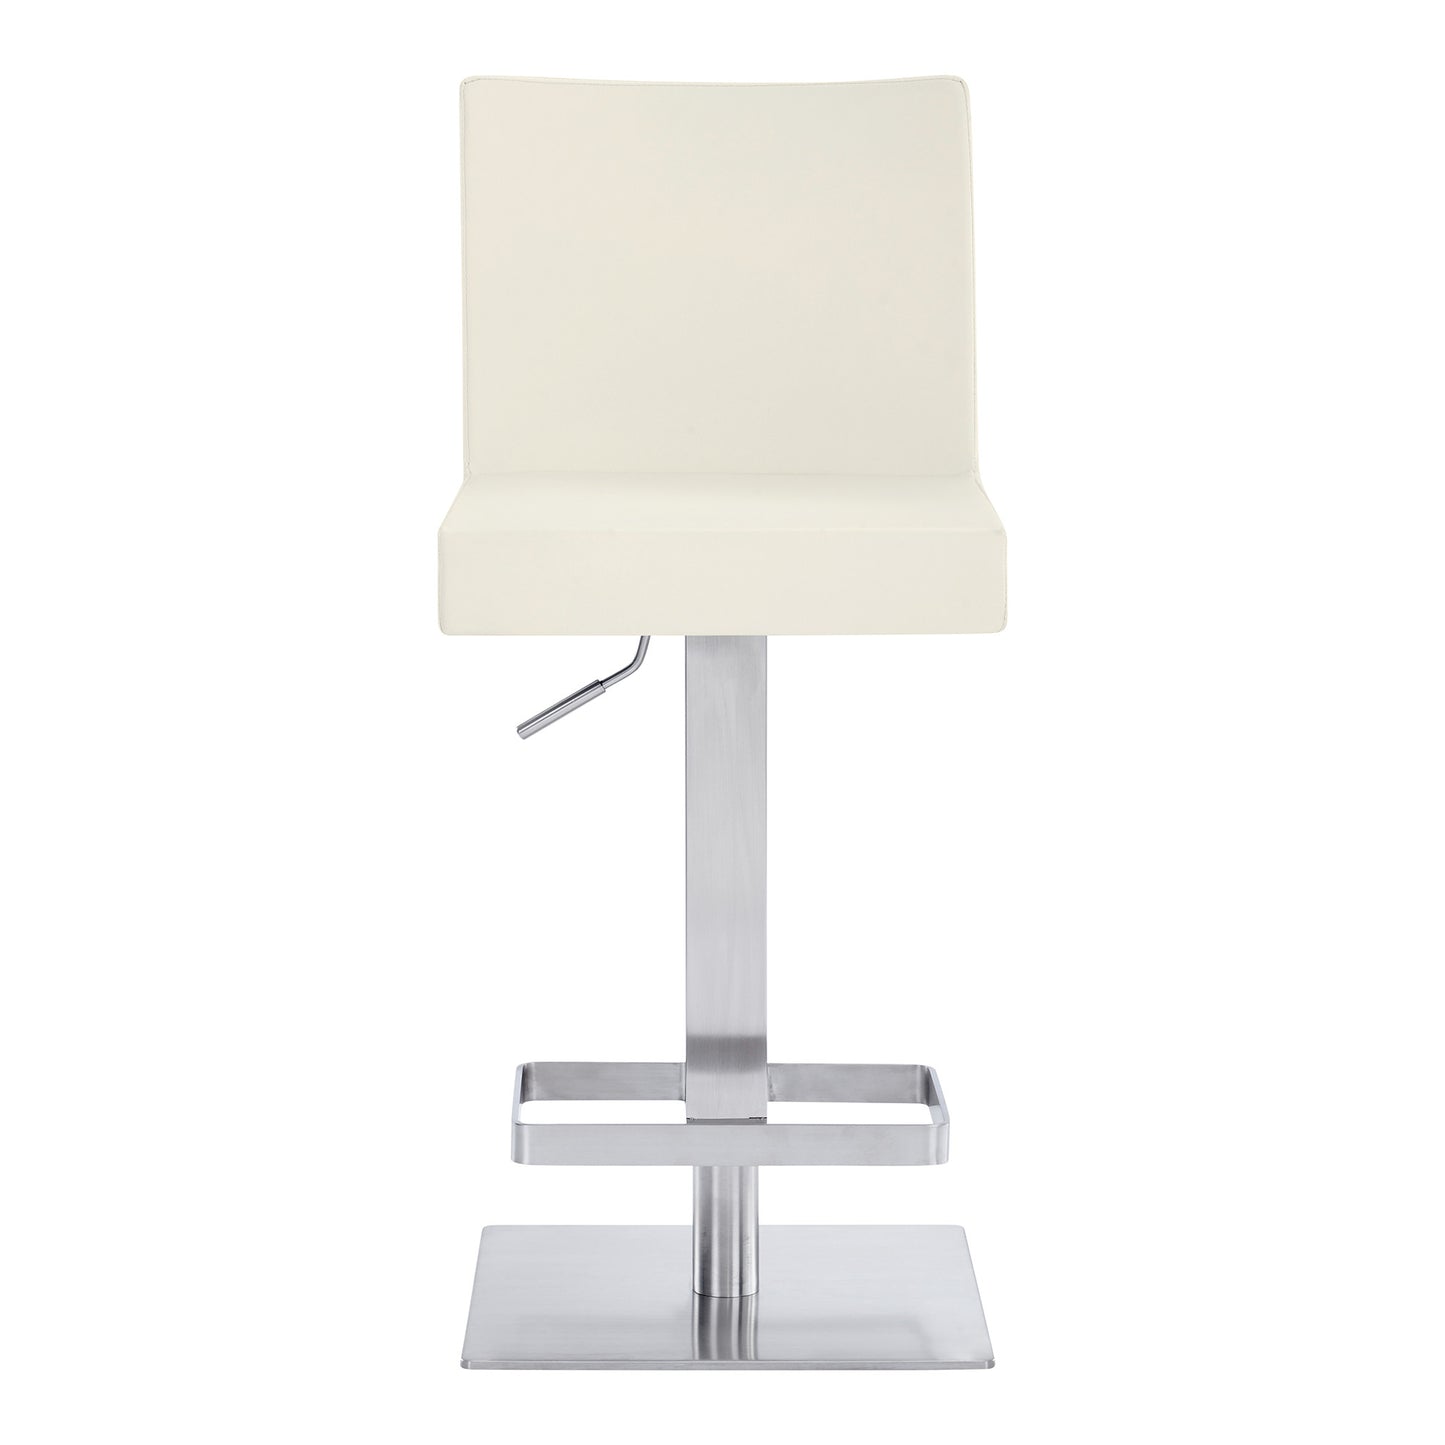 44" White Faux Leather And Iron Swivel Adjustable Height Bar Chair By Homeroots